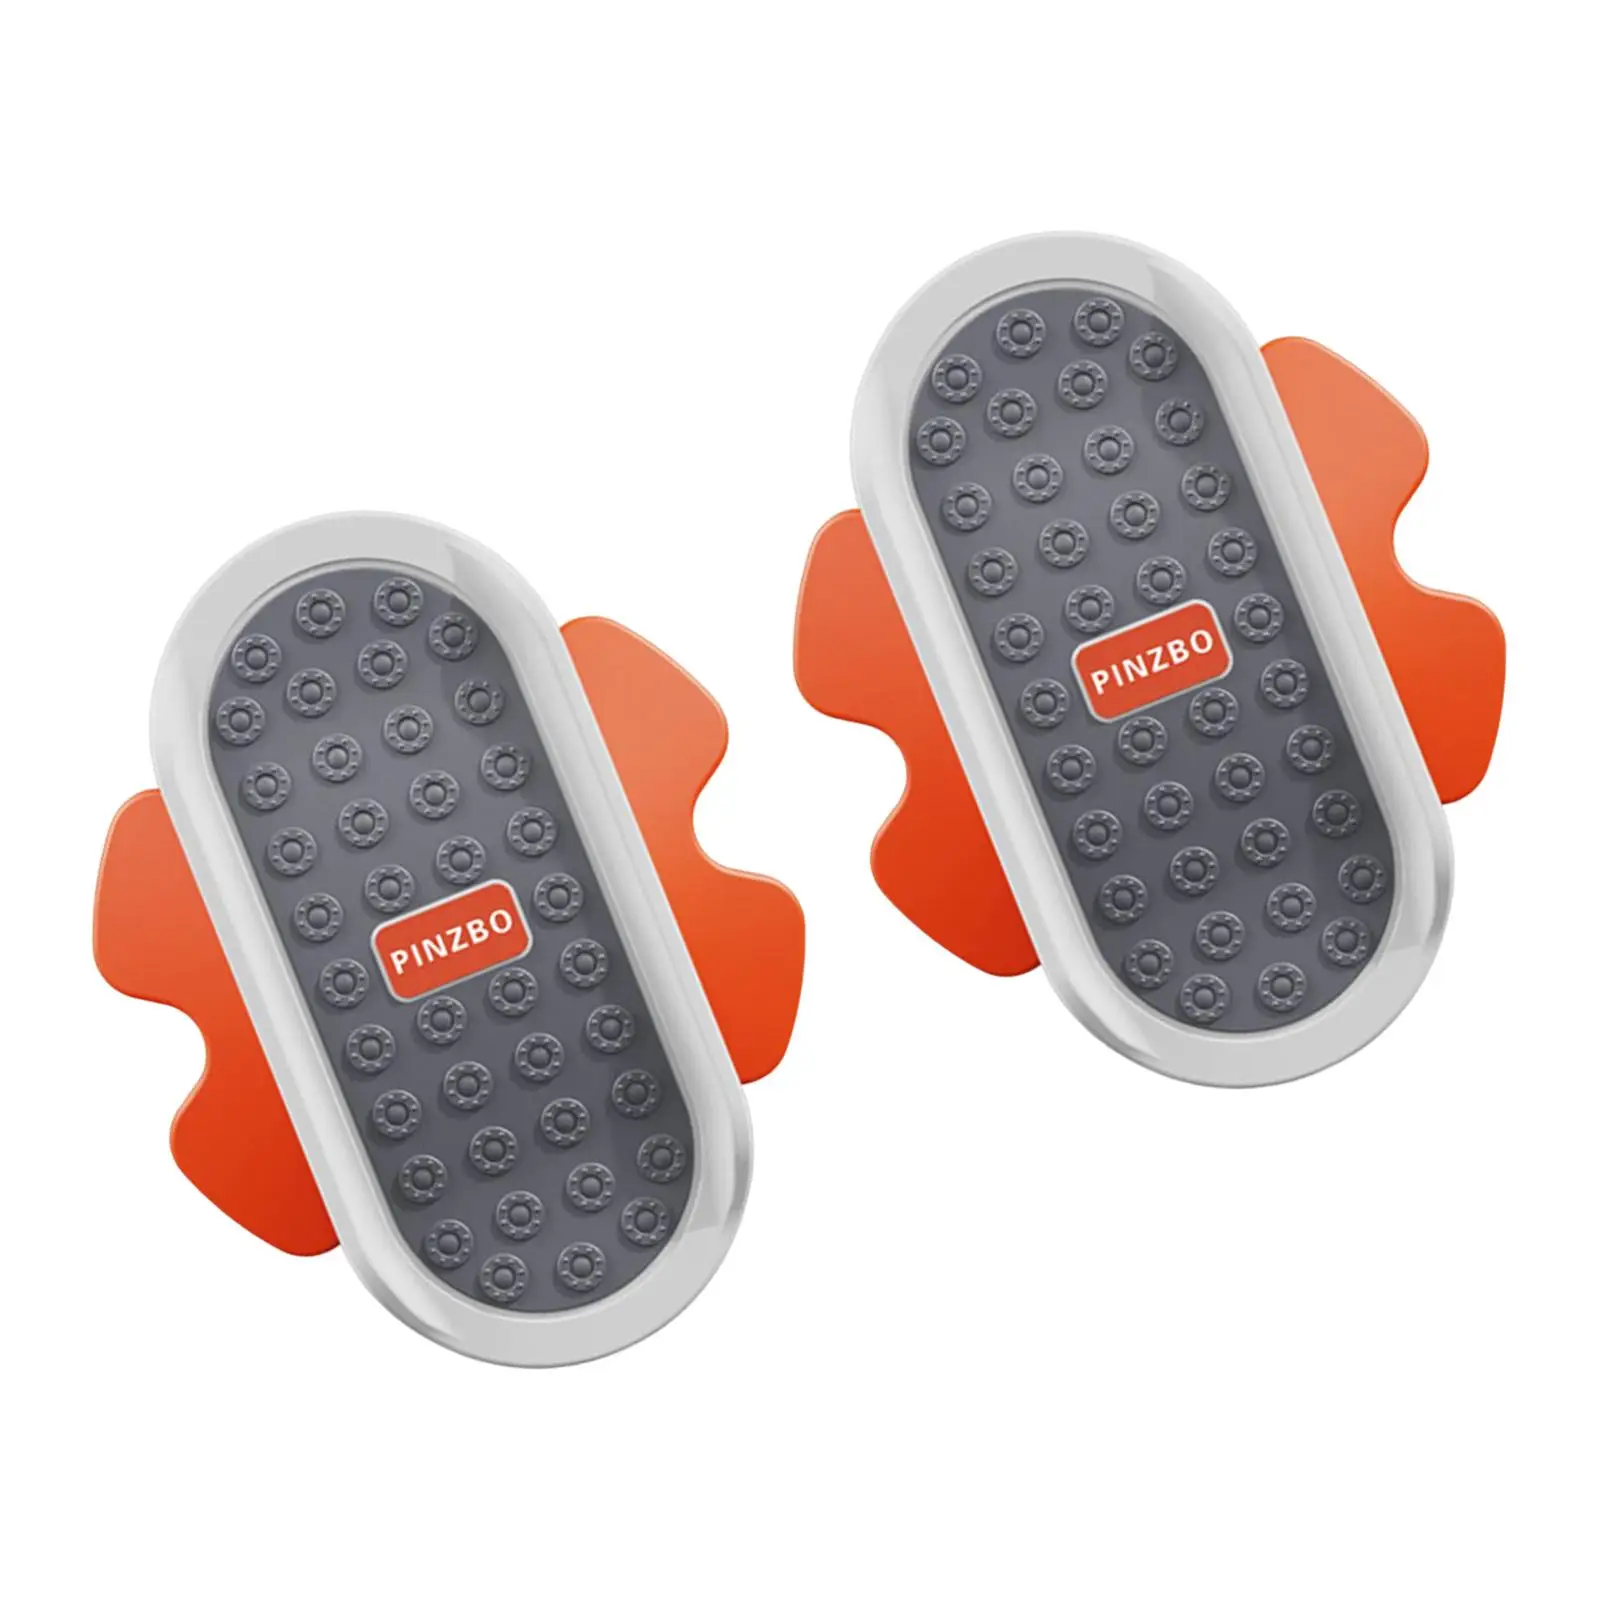 2x Waist Twisting Disc Aerobic Exercise Balance Boards Massage Foot Sole Equipment AB Twisting Board for Fitness Full Body